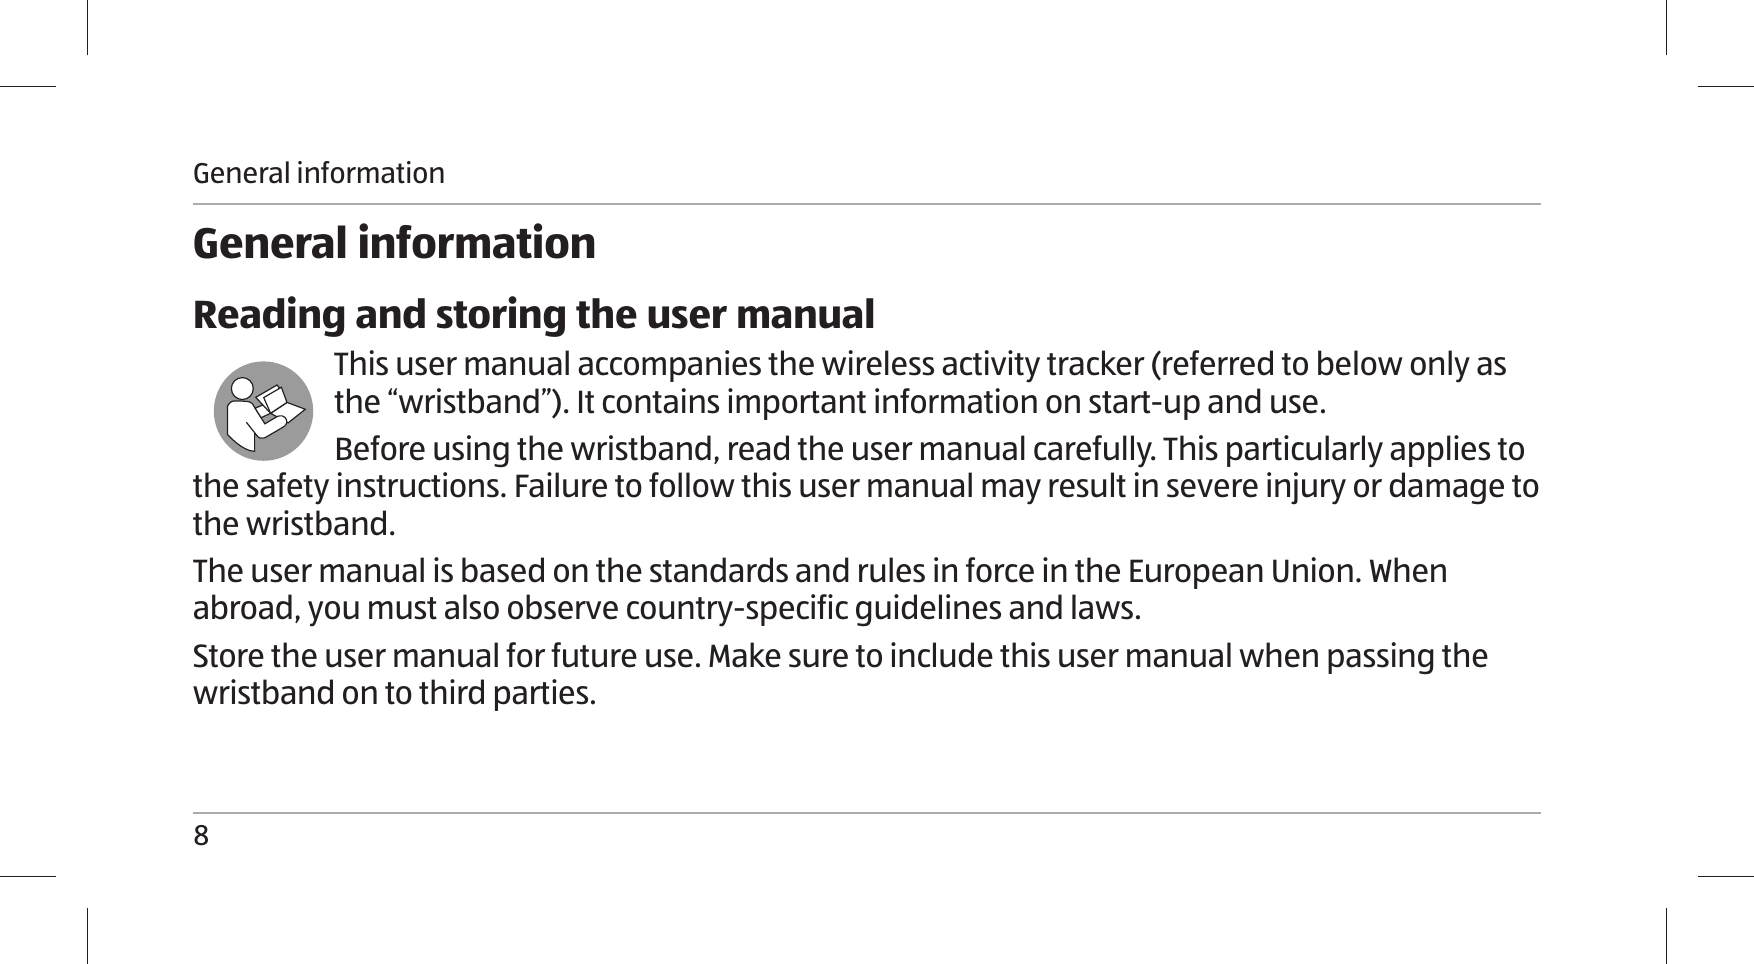 General information8General informationReading and storing the user manualThis user manual accompanies the wireless activity tracker (referred to below only as the “wristband”). It contains important information on start-up and use.Before using the wristband, read the user manual carefully. This particularly applies to the safety instructions. Failure to follow this user manual may result in severe injury or damage to the wristband. The user manual is based on the standards and rules in force in the European Union. When abroad, you must also observe country-specific guidelines and laws.Store the user manual for future use. Make sure to include this user manual when passing the wristband on to third parties.